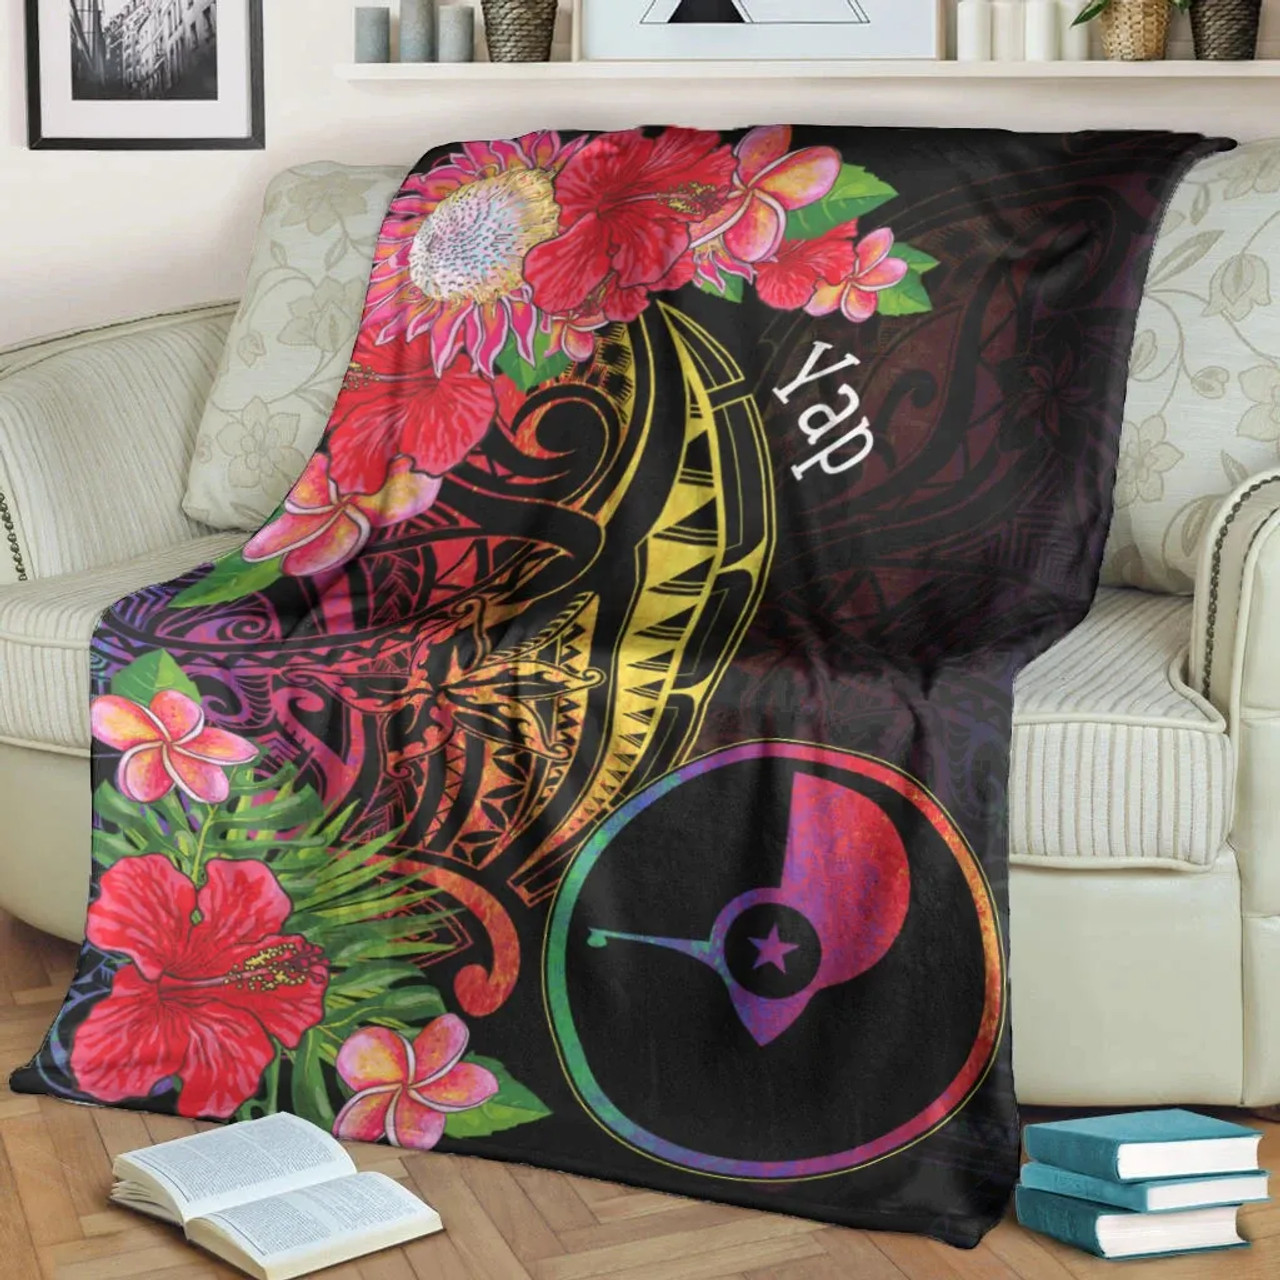 Yap State Premium Blanket - Tropical Hippie Style 2